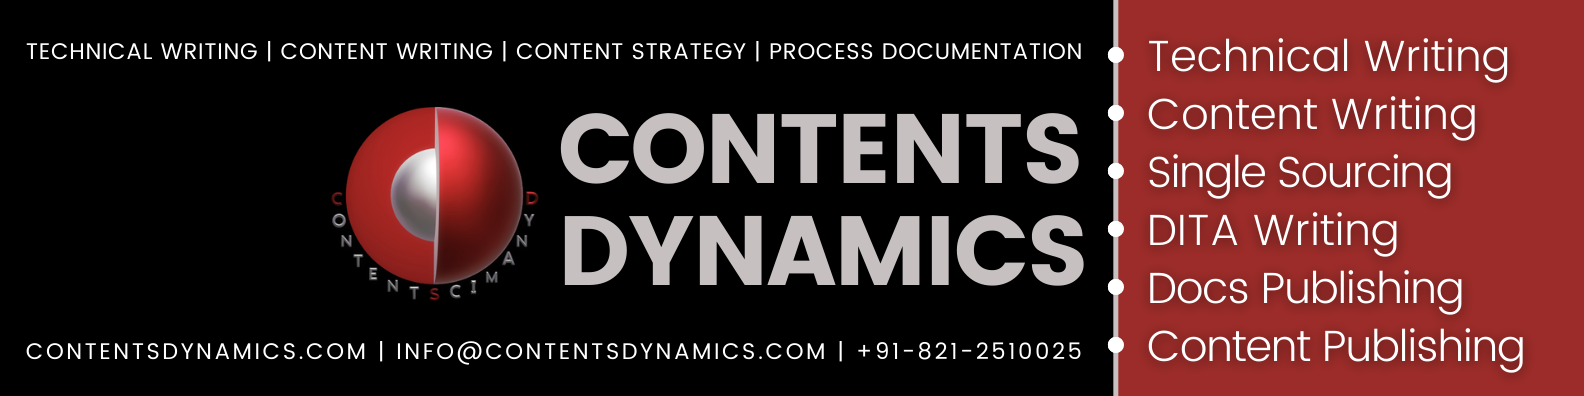 What? Why? and How? at Contents Dynamics